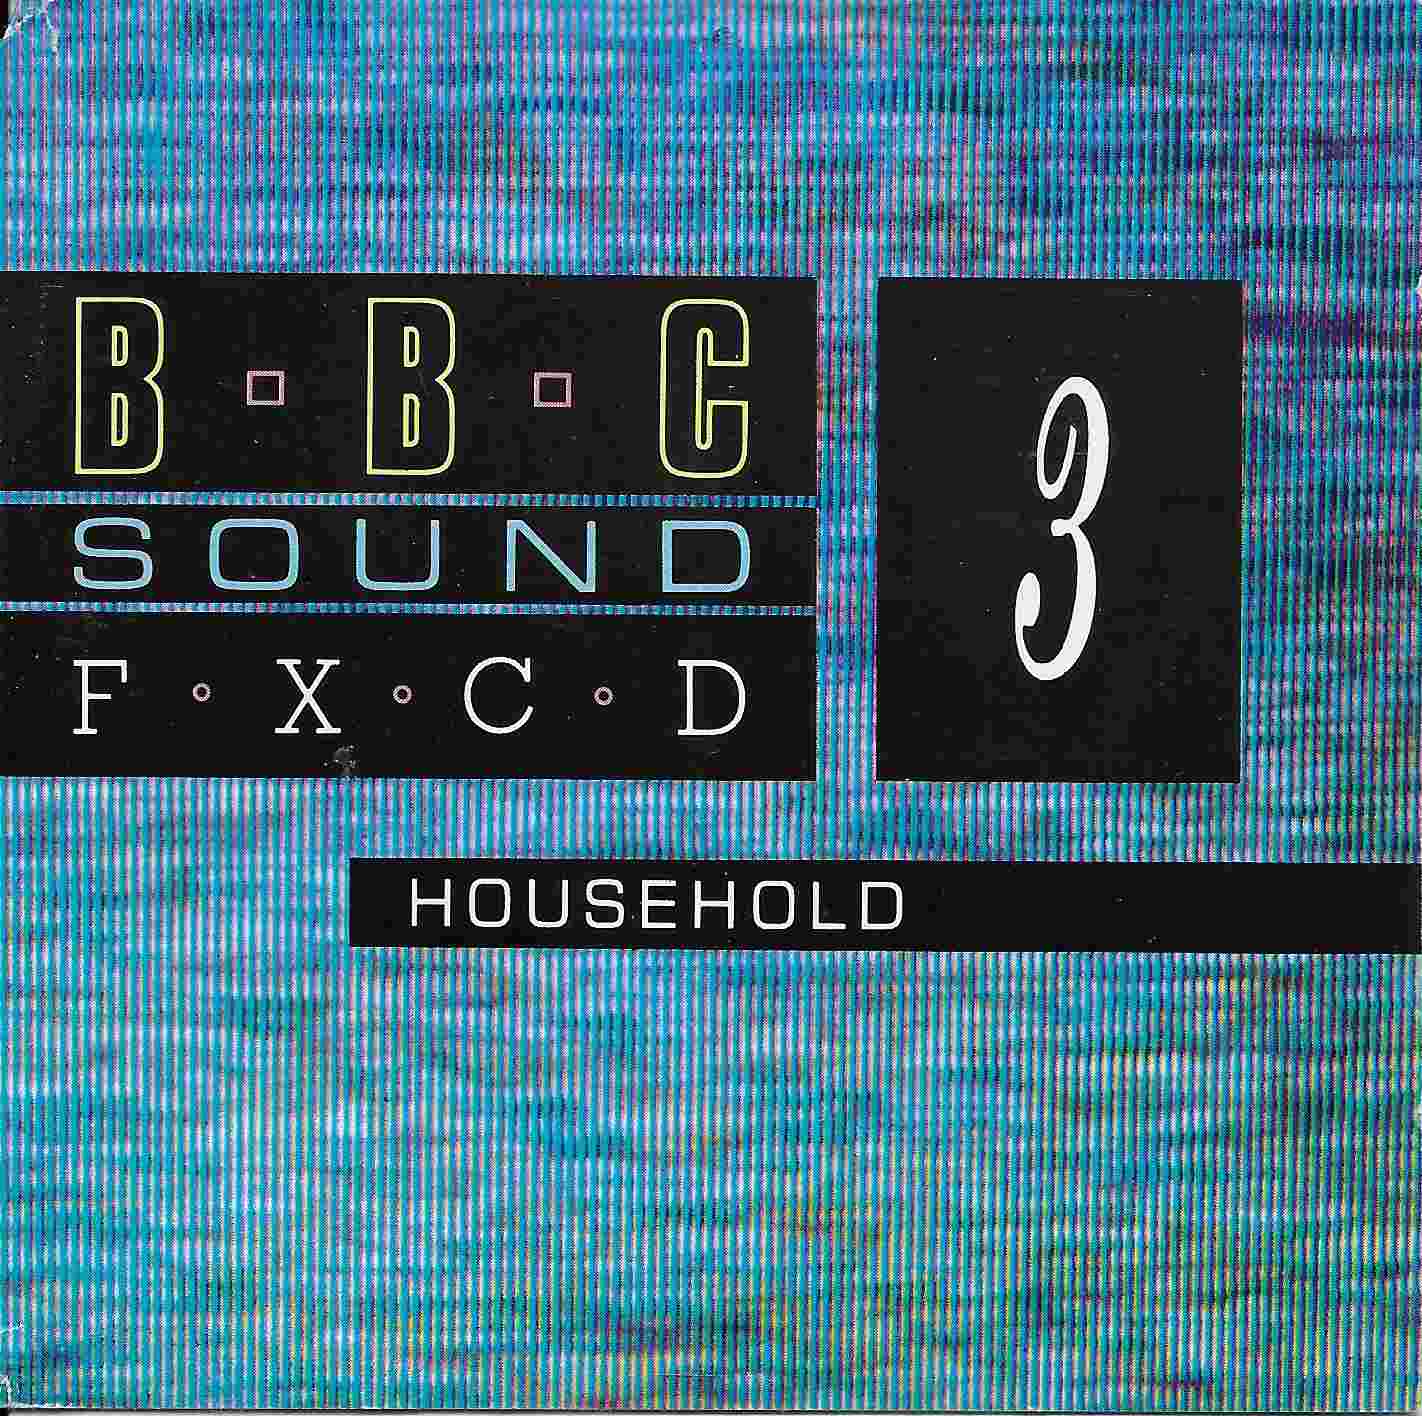 Picture of BBCCD SFX003 Household by artist Various from the BBC cds - Records and Tapes library